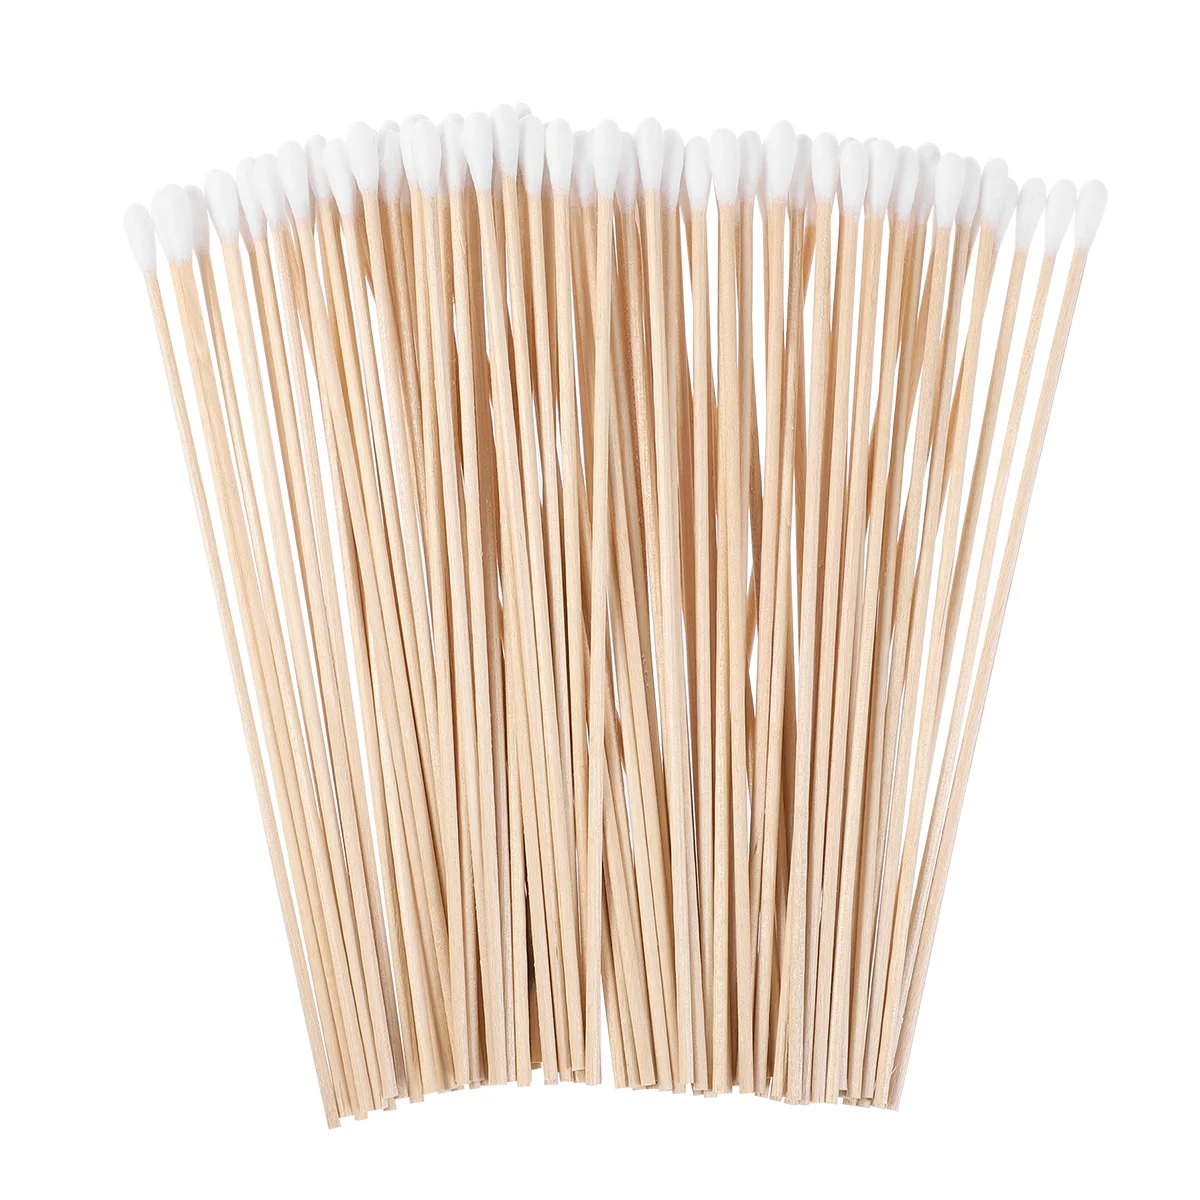 

ROSENICE 100Pcs Long Wood Handle Cotton Swab Medical Swabs Ear Cleaning Tool Makeup Removal Wound Care Cotton Buds